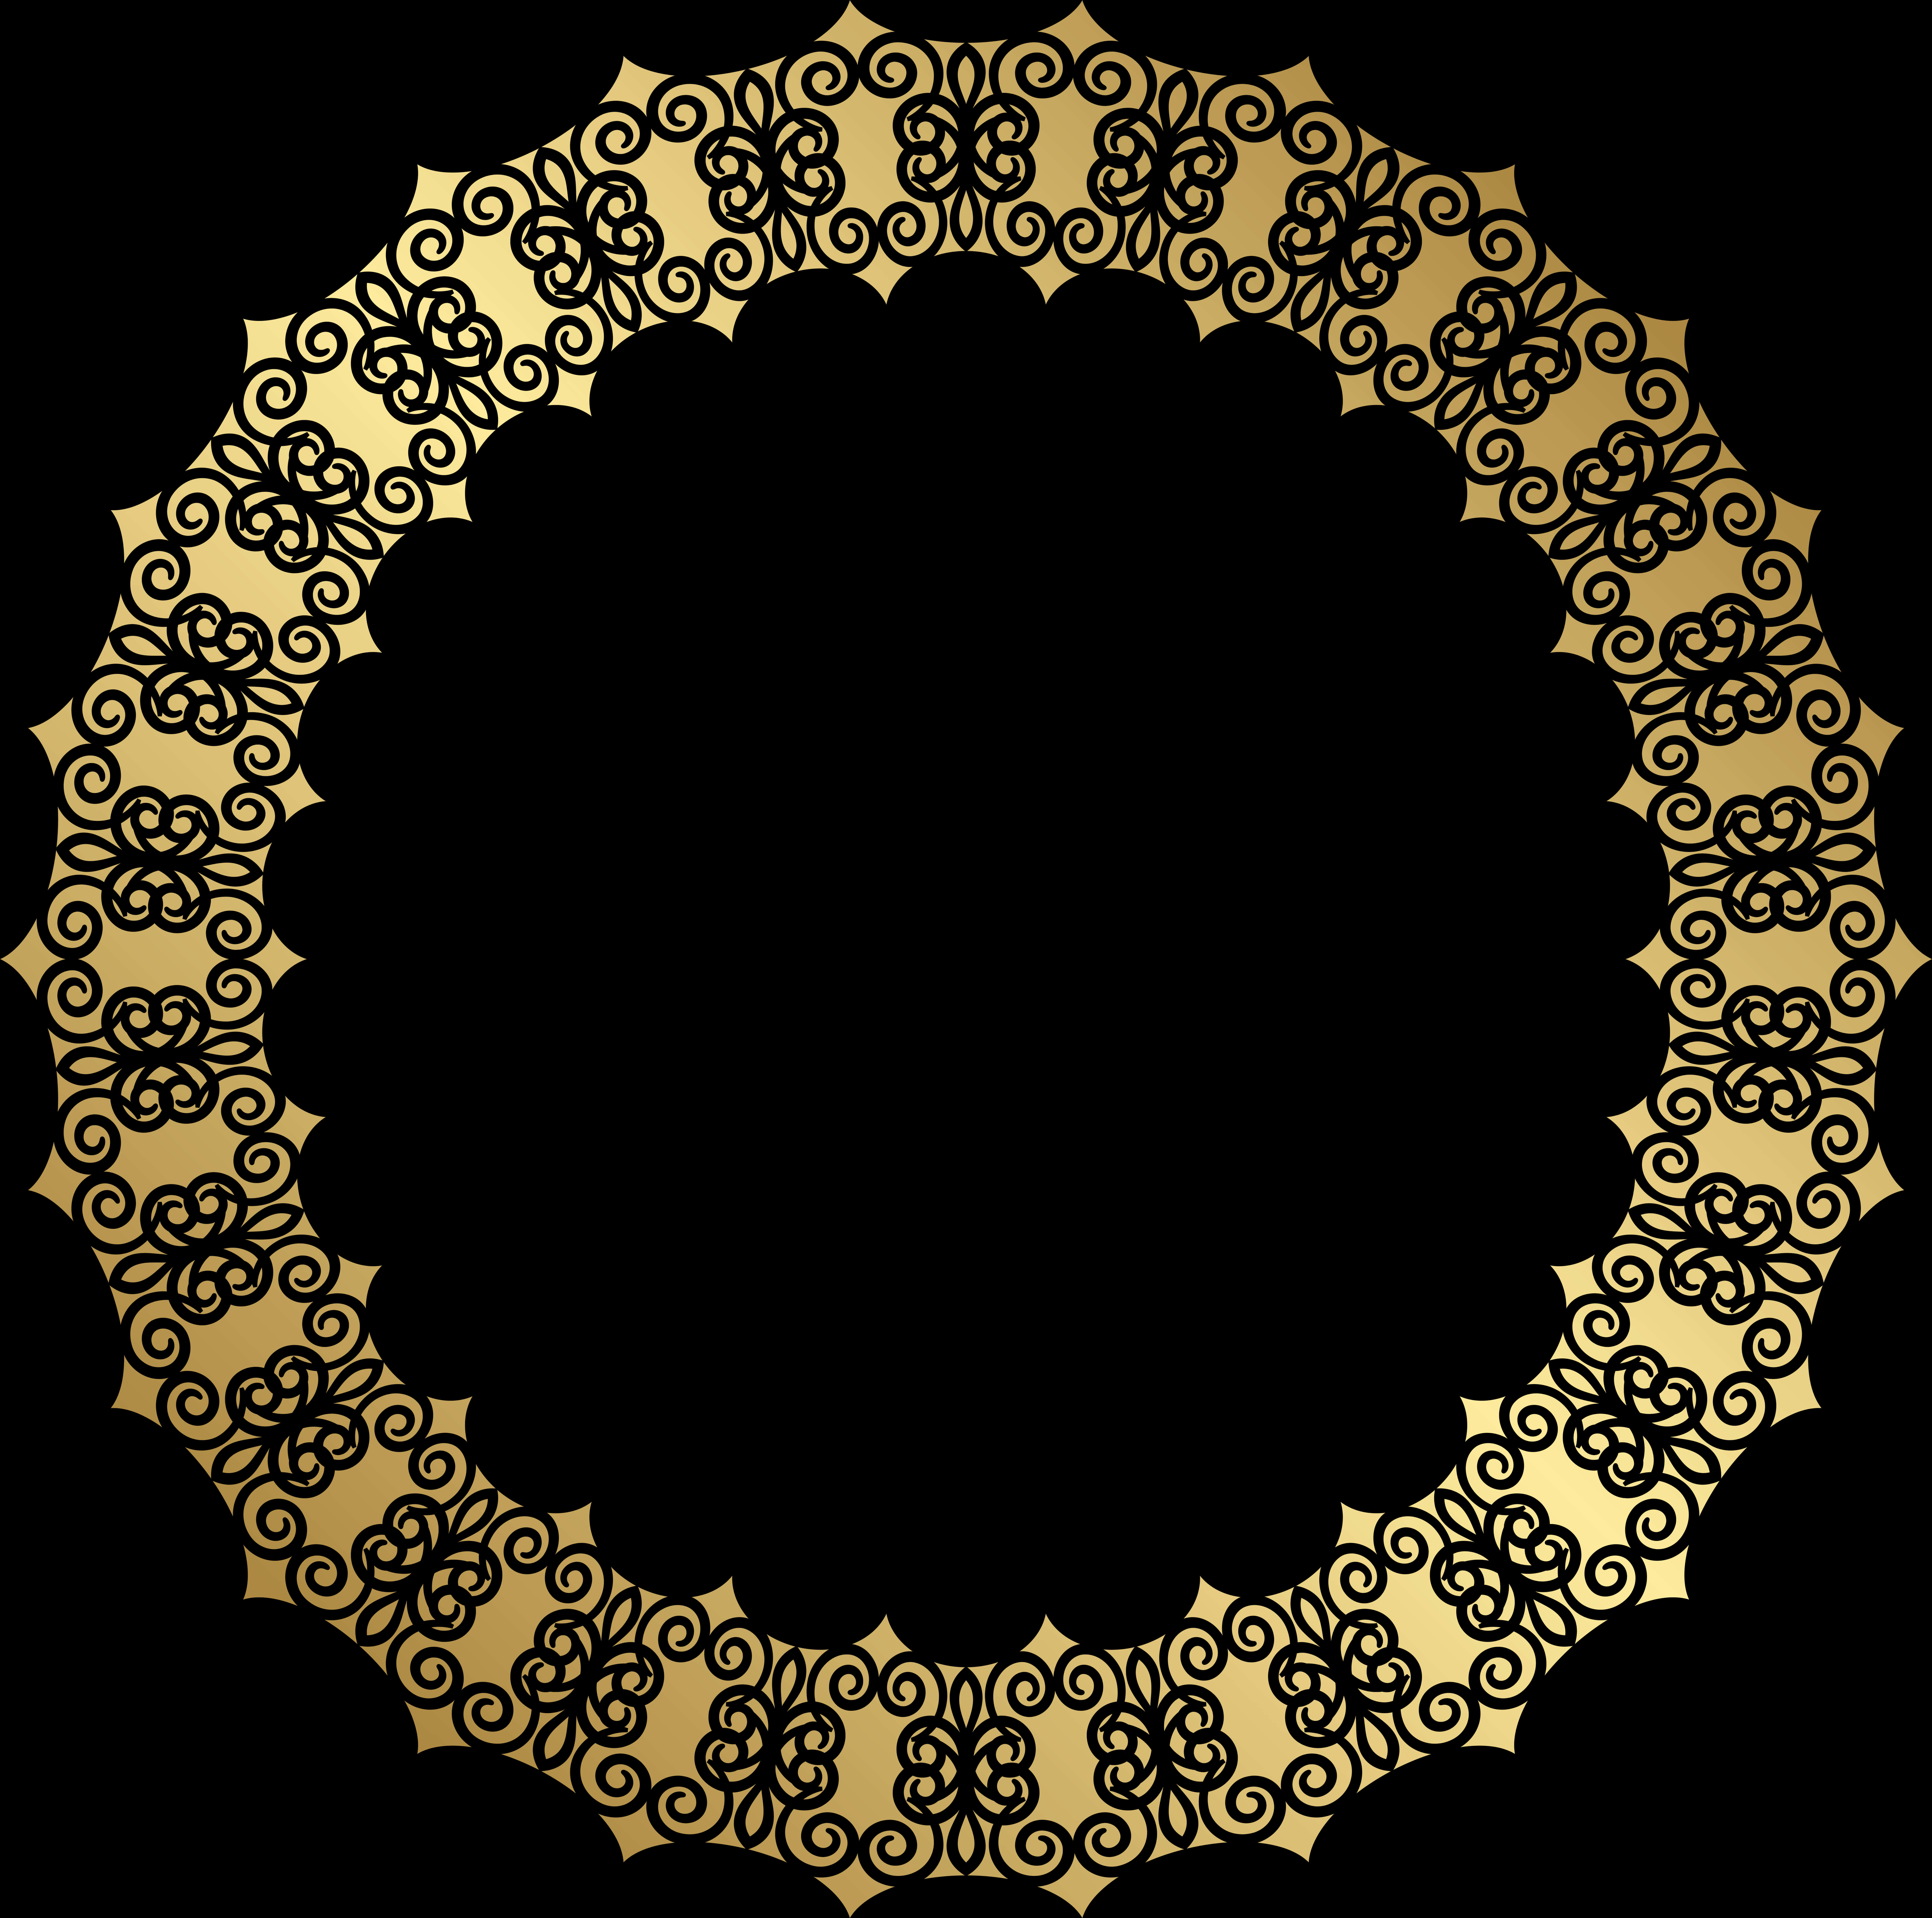 A Gold Circular Frame With Black Background